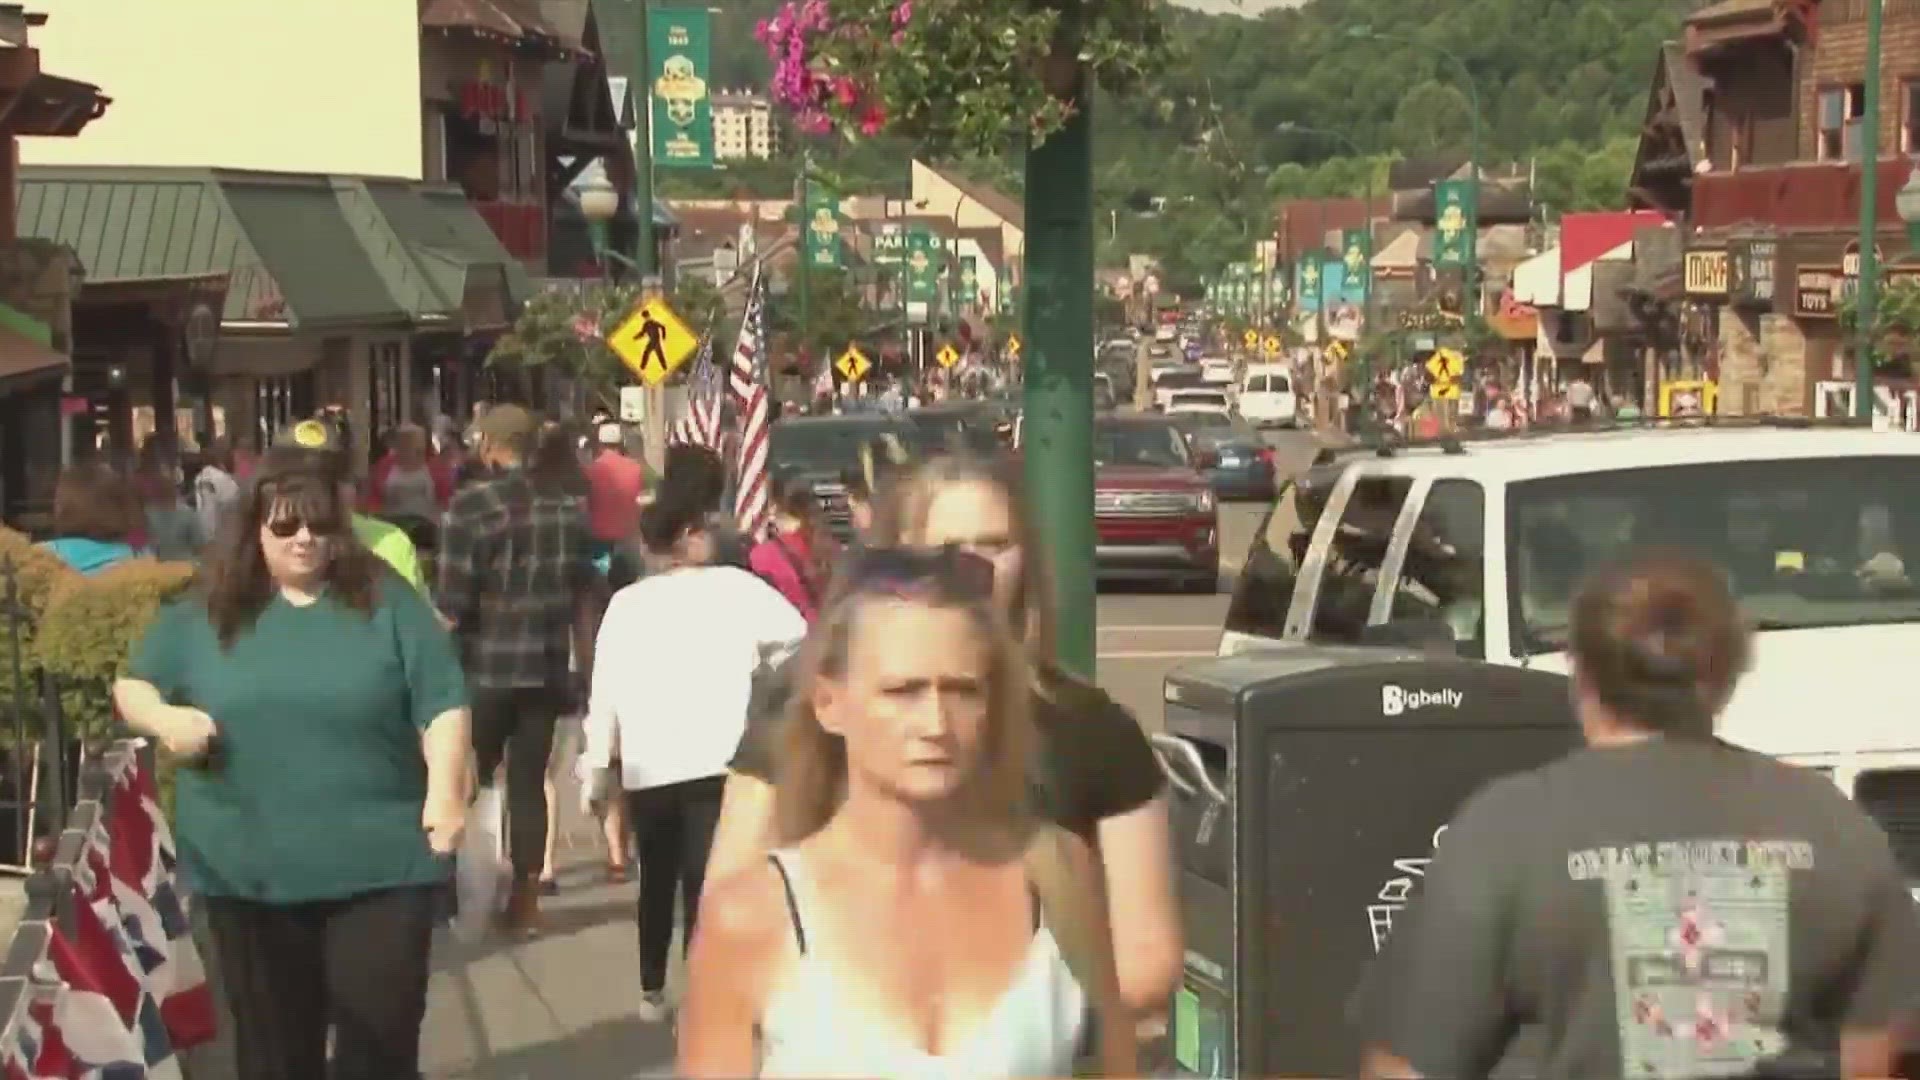 It took a while for the Gatlinburg economy to bounce back after the fires, but now, business is booming.